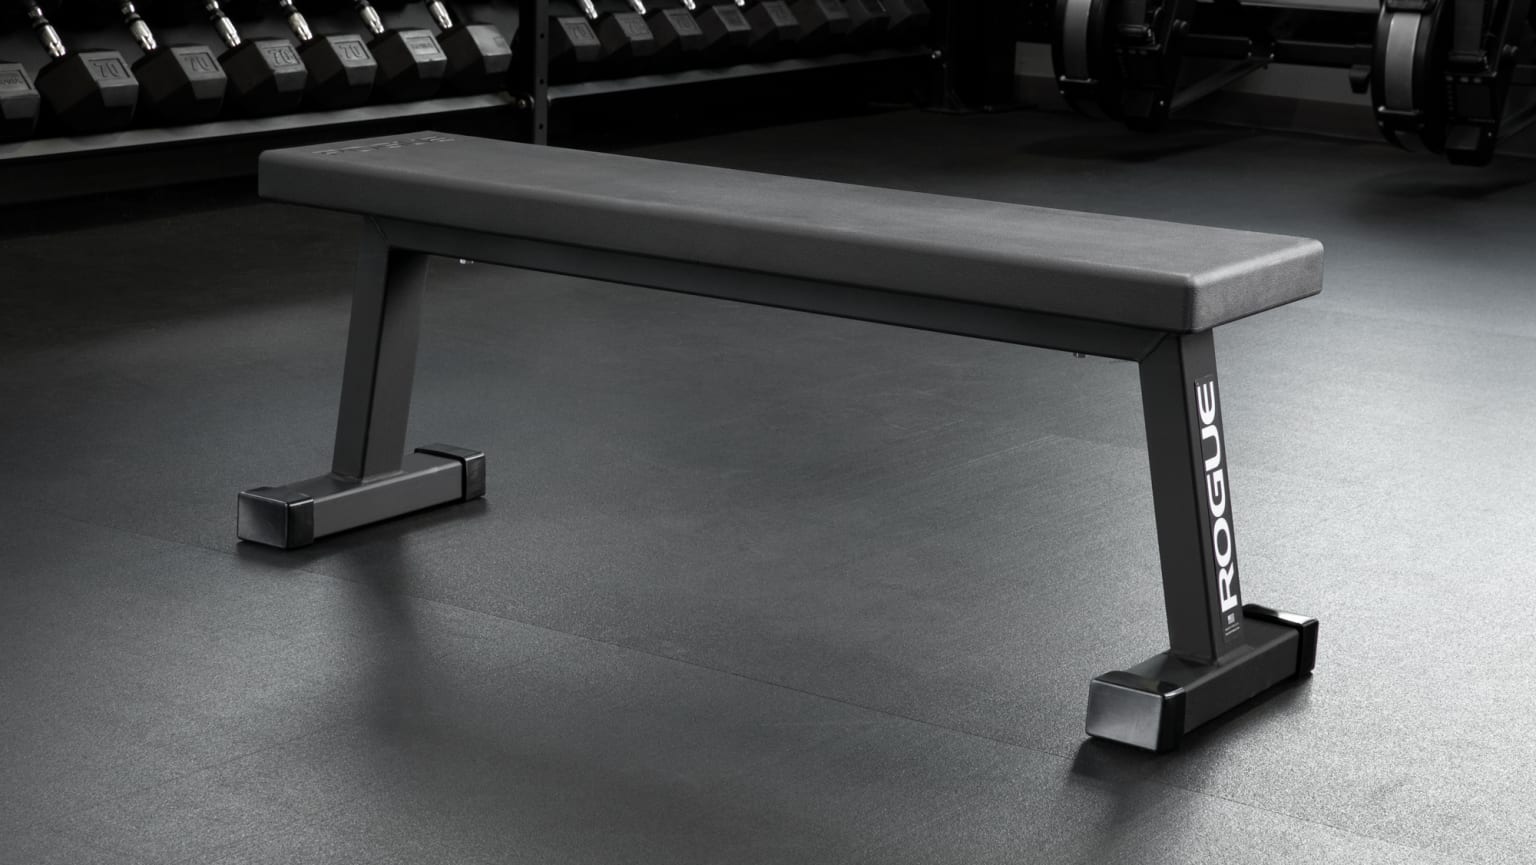 Buy Gym Flat Bench Online - BullrocK Fitness - India